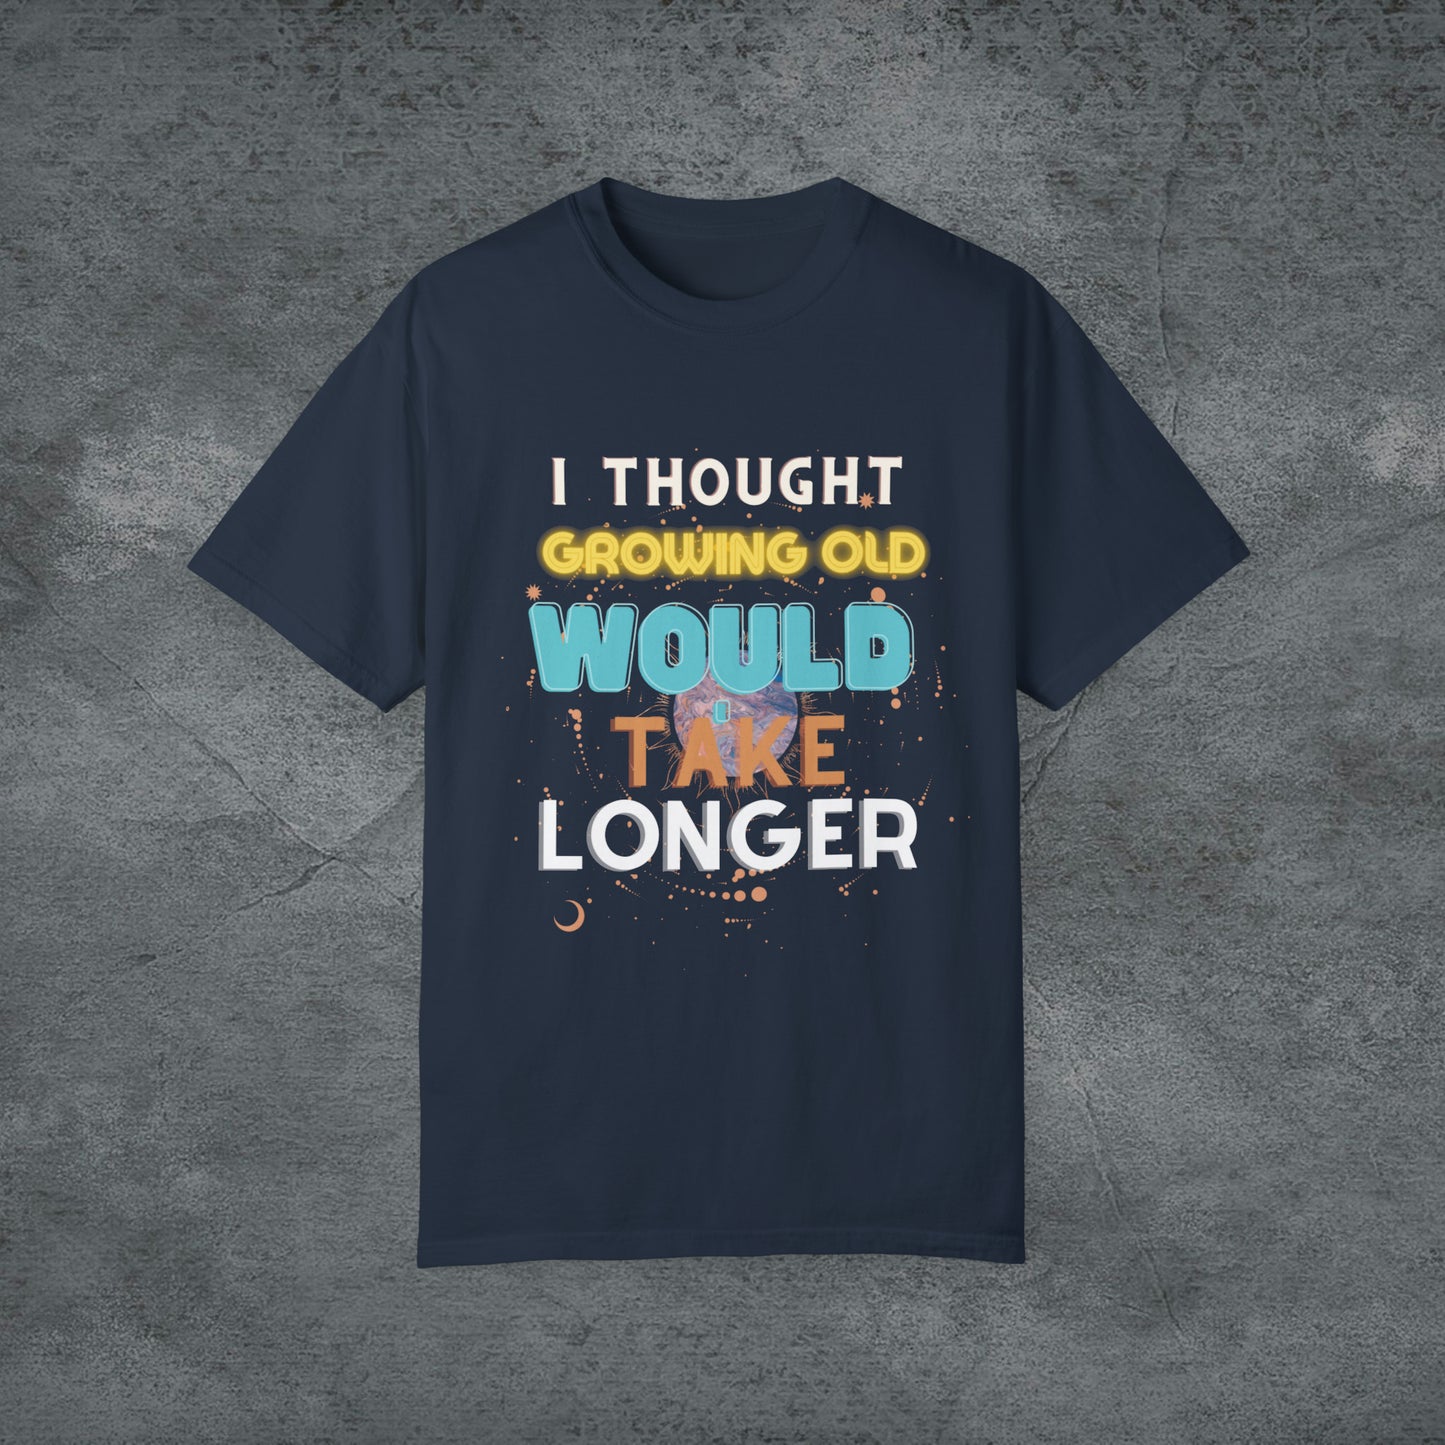 I Thought Growing Old Would Take Longer T-Shirt | Getting Older T Shirt | Funny Adulting T-Shirt | Old Age T Shirt | Old Person T Shirt T-Shirt Navy S 